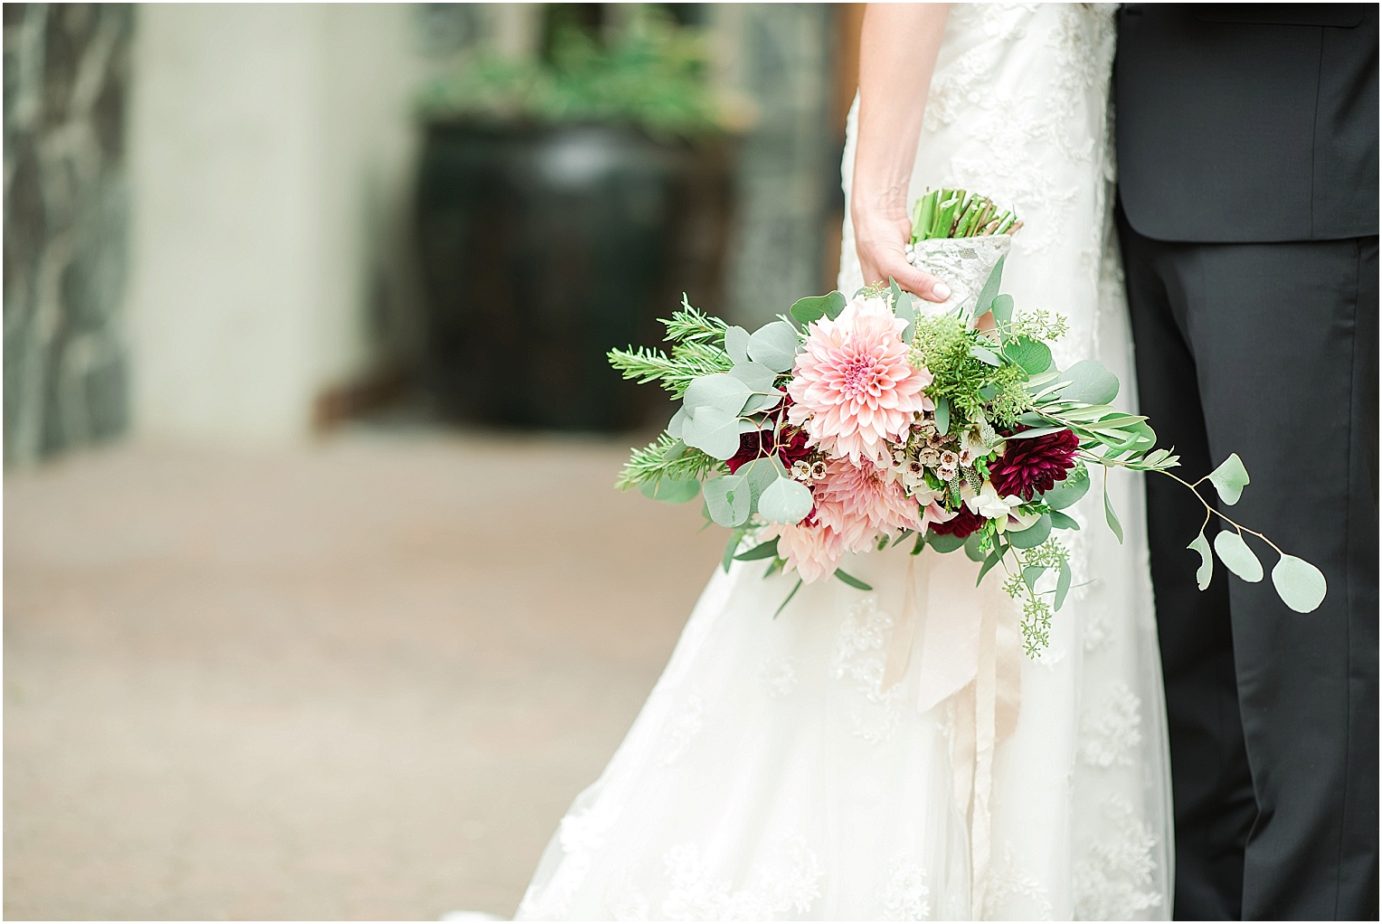 Favorite wedding flowers of 2017 For brides maroon and peach wedding flowers